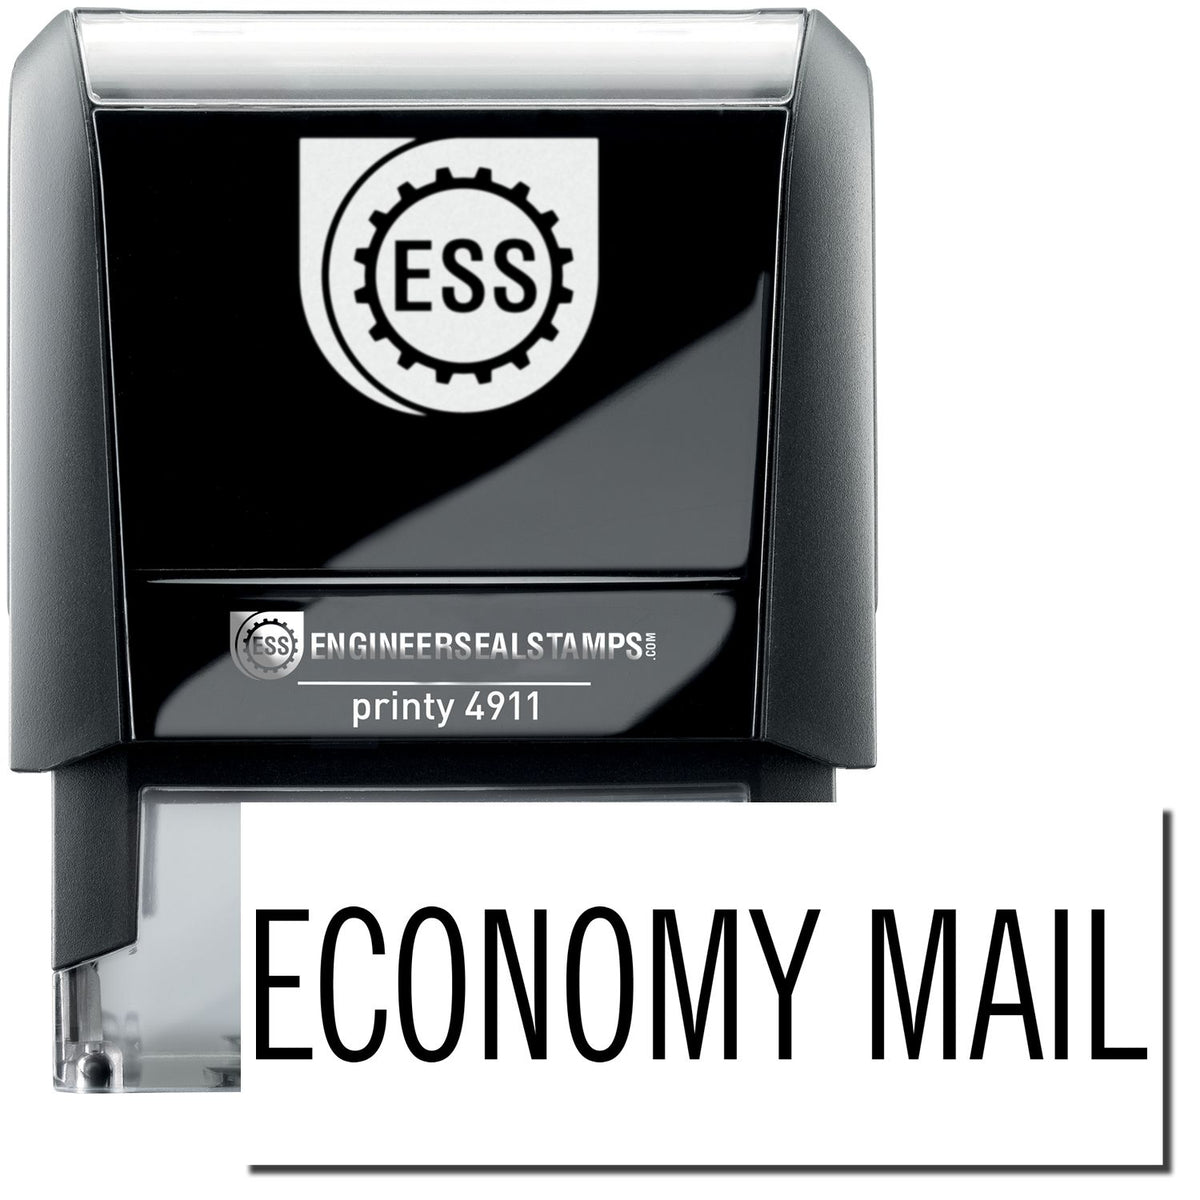 A self-inking stamp with a stamped image showing how the text &quot;ECONOMY MAIL&quot; is displayed after stamping.